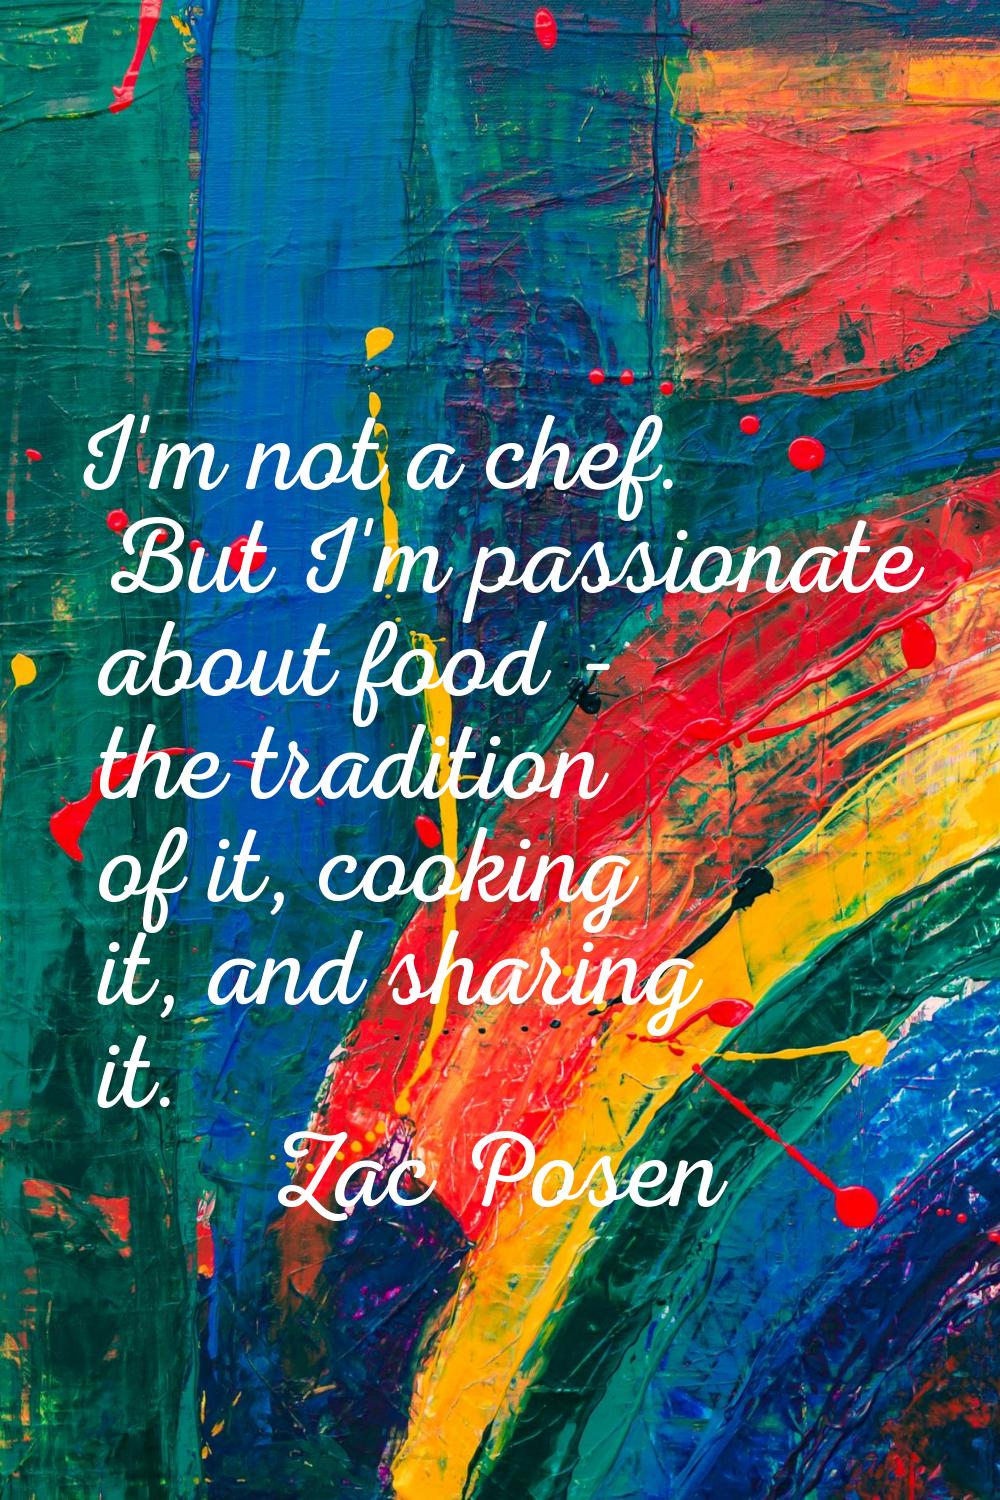 I'm not a chef. But I'm passionate about food - the tradition of it, cooking it, and sharing it.